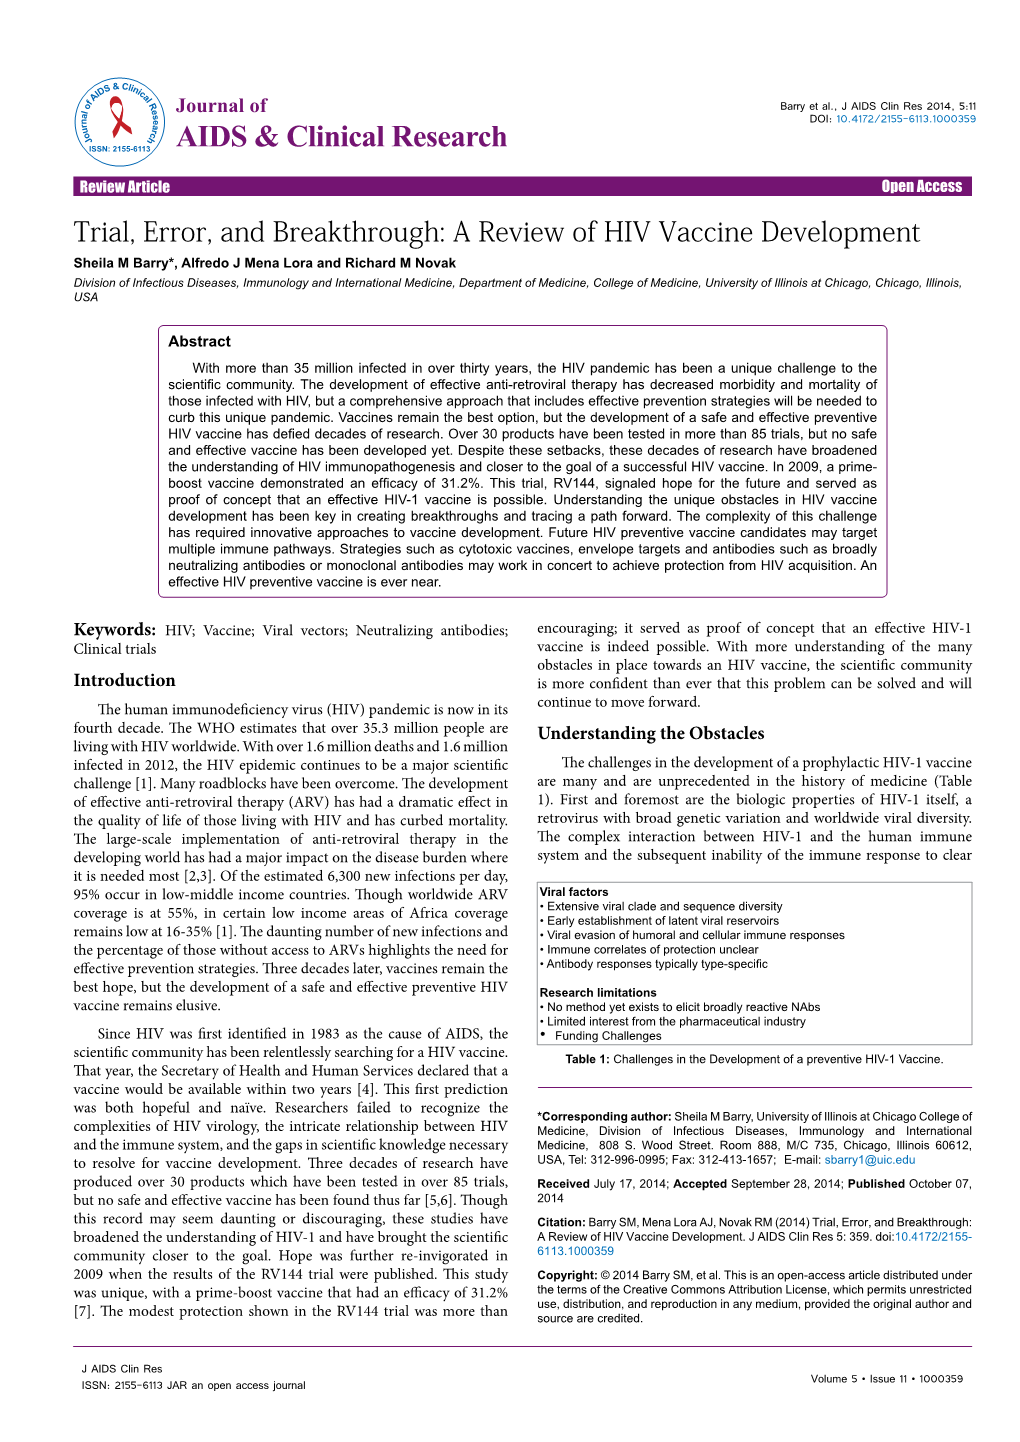 Trial, Error, and Breakthrough: a Review of HIV Vaccine Development